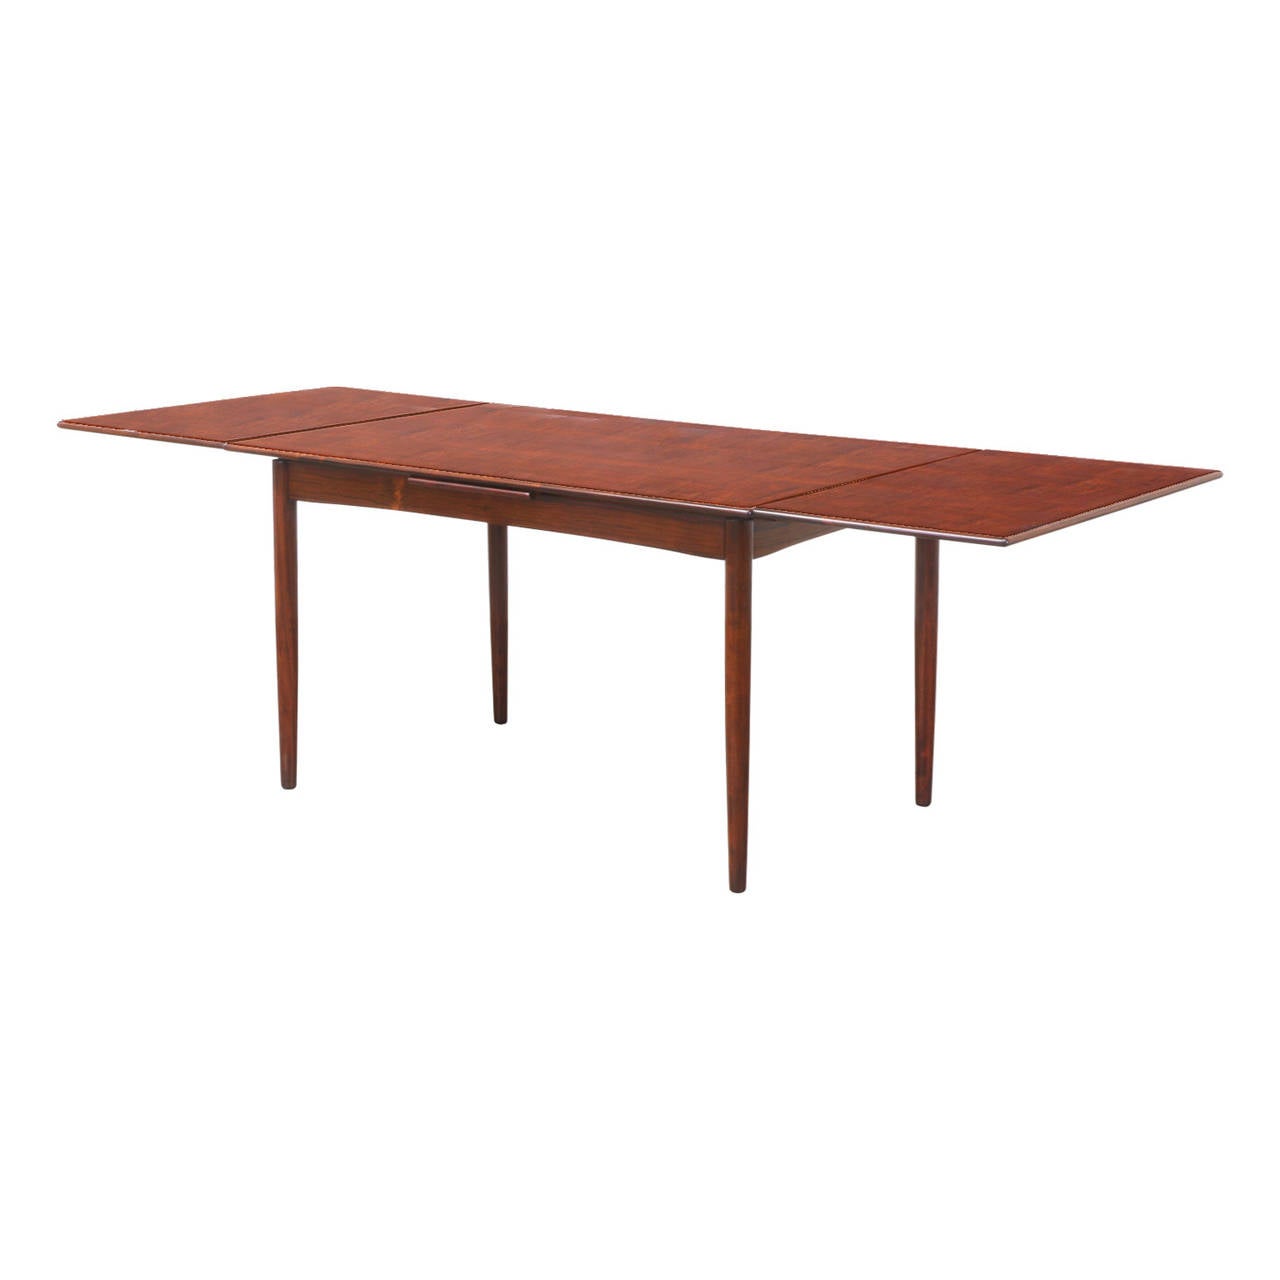 Designer: Unknown
Manufacturer: Unknown
Period/Style: Danish Modern
Country: Denmark
Date: 1950’s

Dimensions: 29″H x 51″L x 34″W
Extension Leaves 19″L Each – Expands up to 89″
Materials: Brazilian Rosewood
Condition: Excellent – Newly